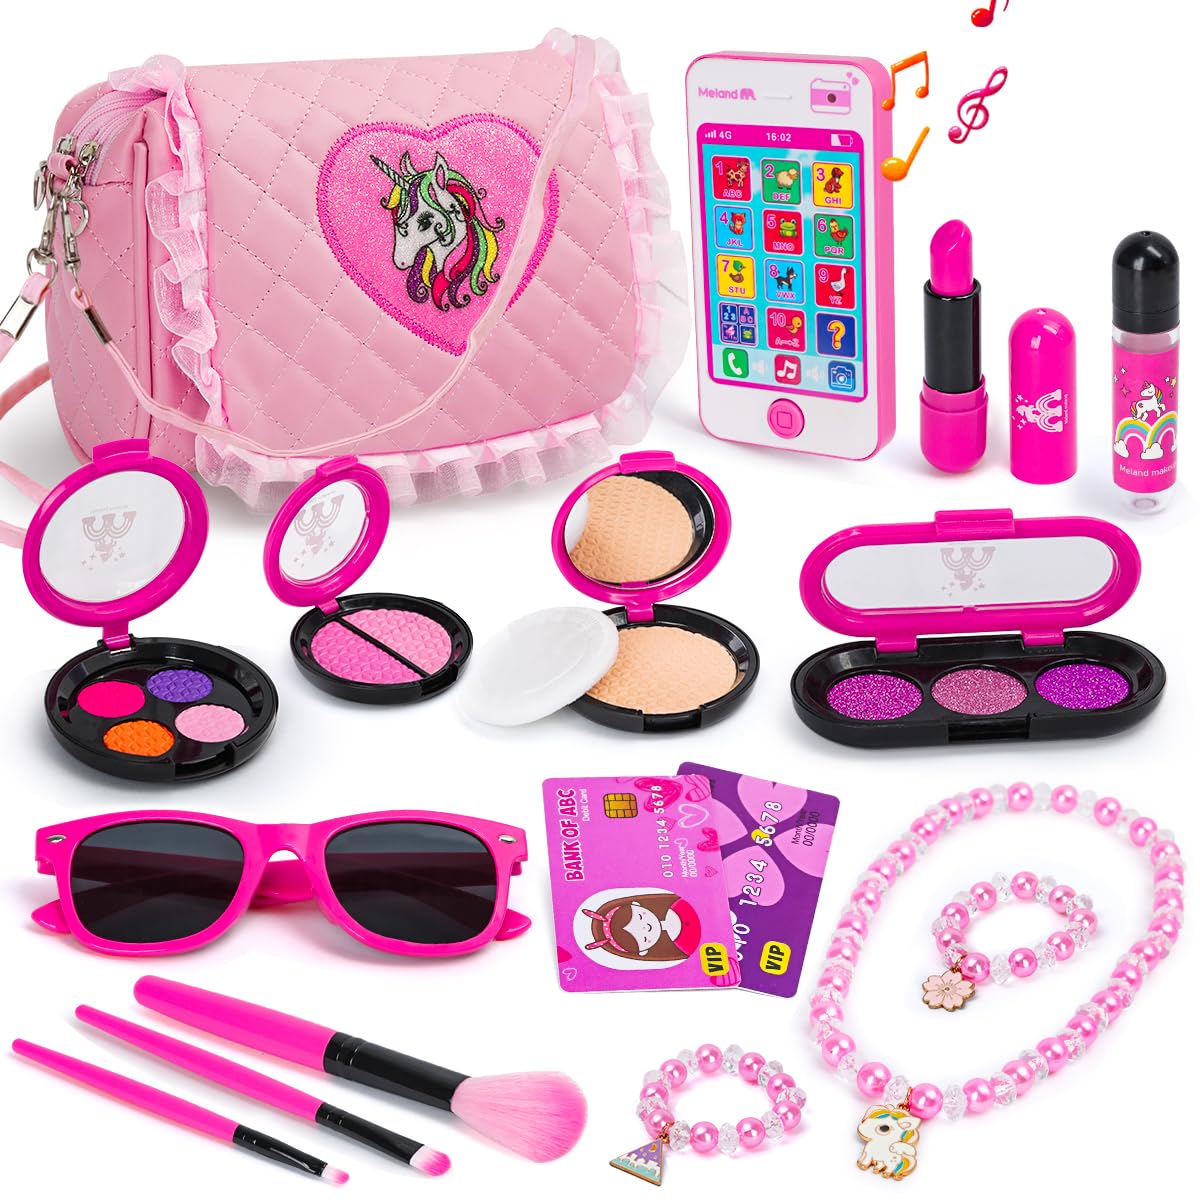 Meland Kids Makeup Kit - Pretend Makeup for Toddler Girls, Fake Makeup with Little Girls Purse, Play Makeup, Smartphone, Toy Gift for Girls Age 3,4,5,6 Year Old for Birthday Christmas